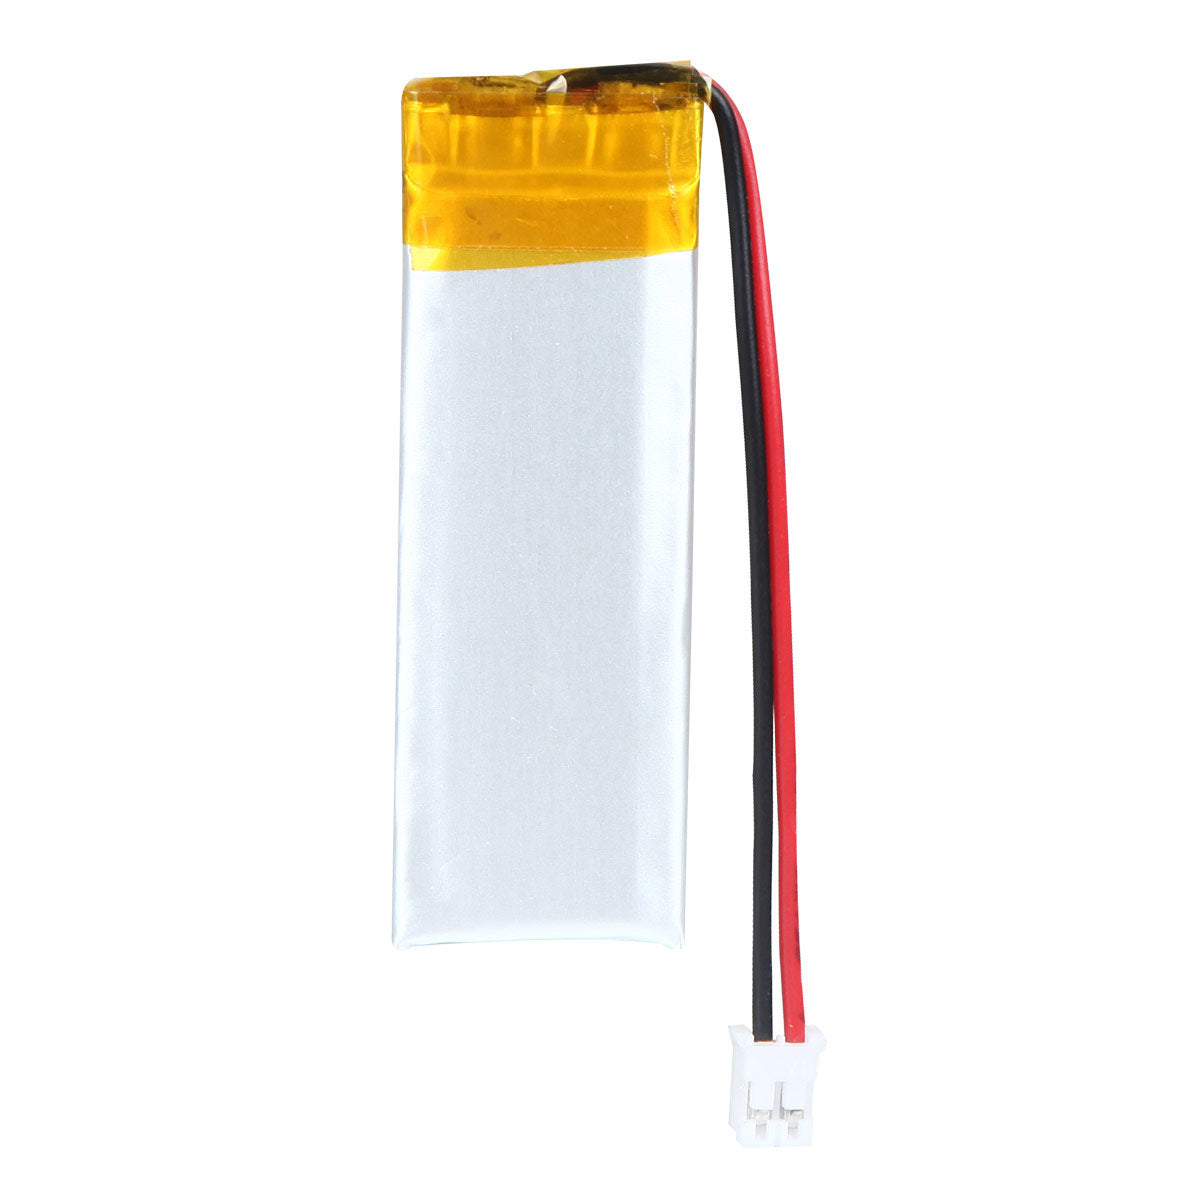 3.7V 350mAh 501745 Rechargeable Polymer Lithium-Ion Battery